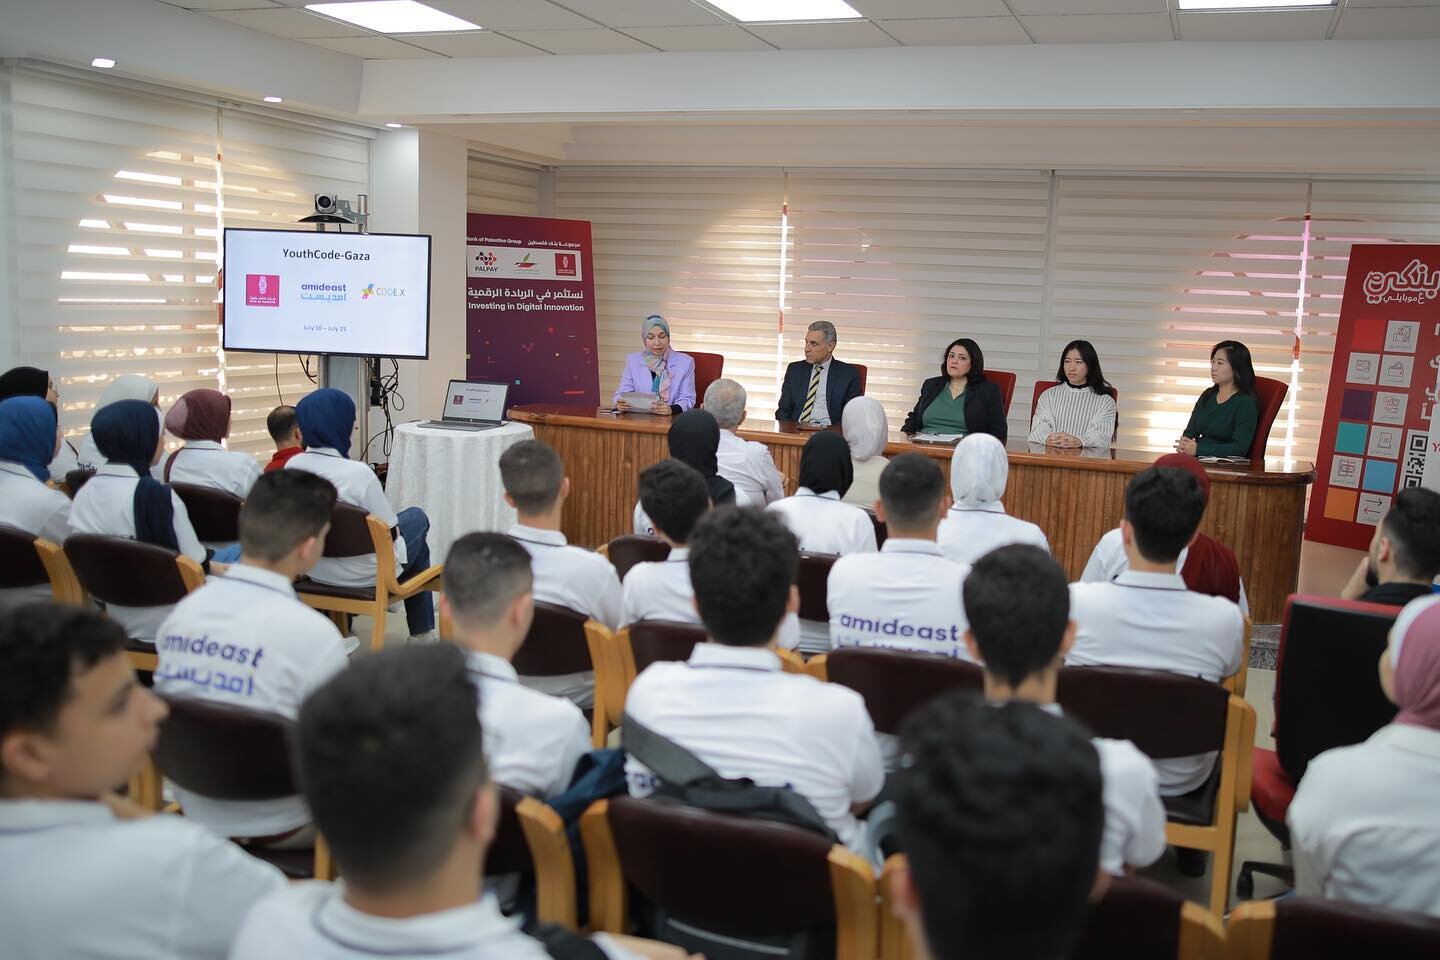 On Monday, we celebrated the kickoff of our new program with @amideast_gaza and @bankofpalestine, YouthCode-Gaza! This is the first bootcamp in our program that brings our U.S. instructors together with talented young students across Gaza to teach th